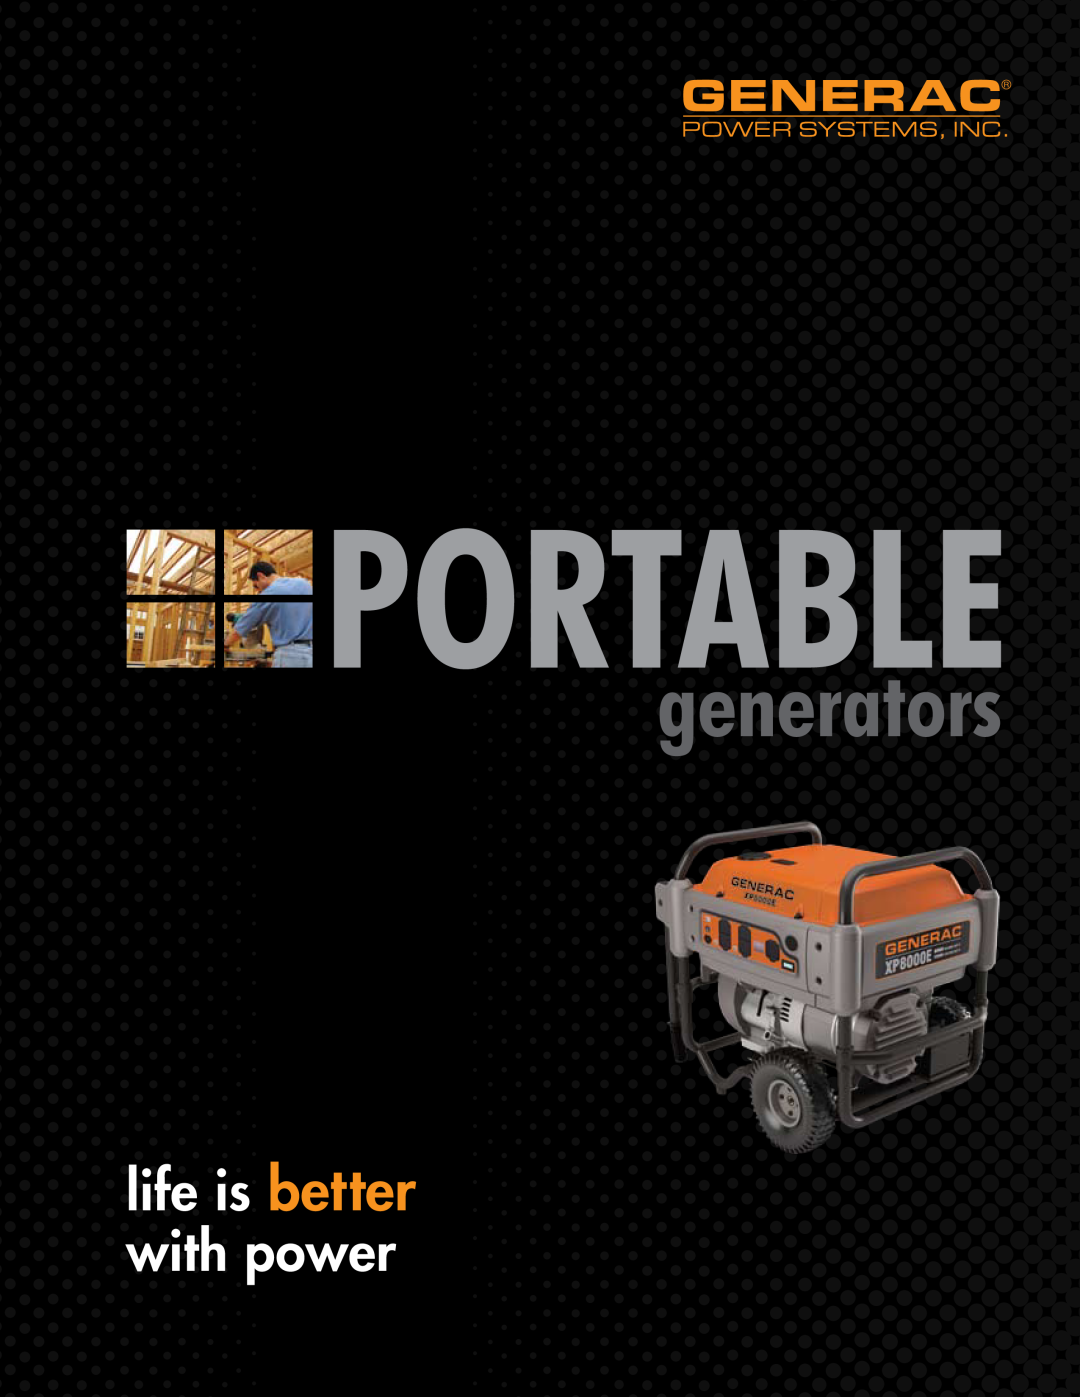 Generac Power Systems XP Series manual Portable, generators, lifeisbetter withpower 